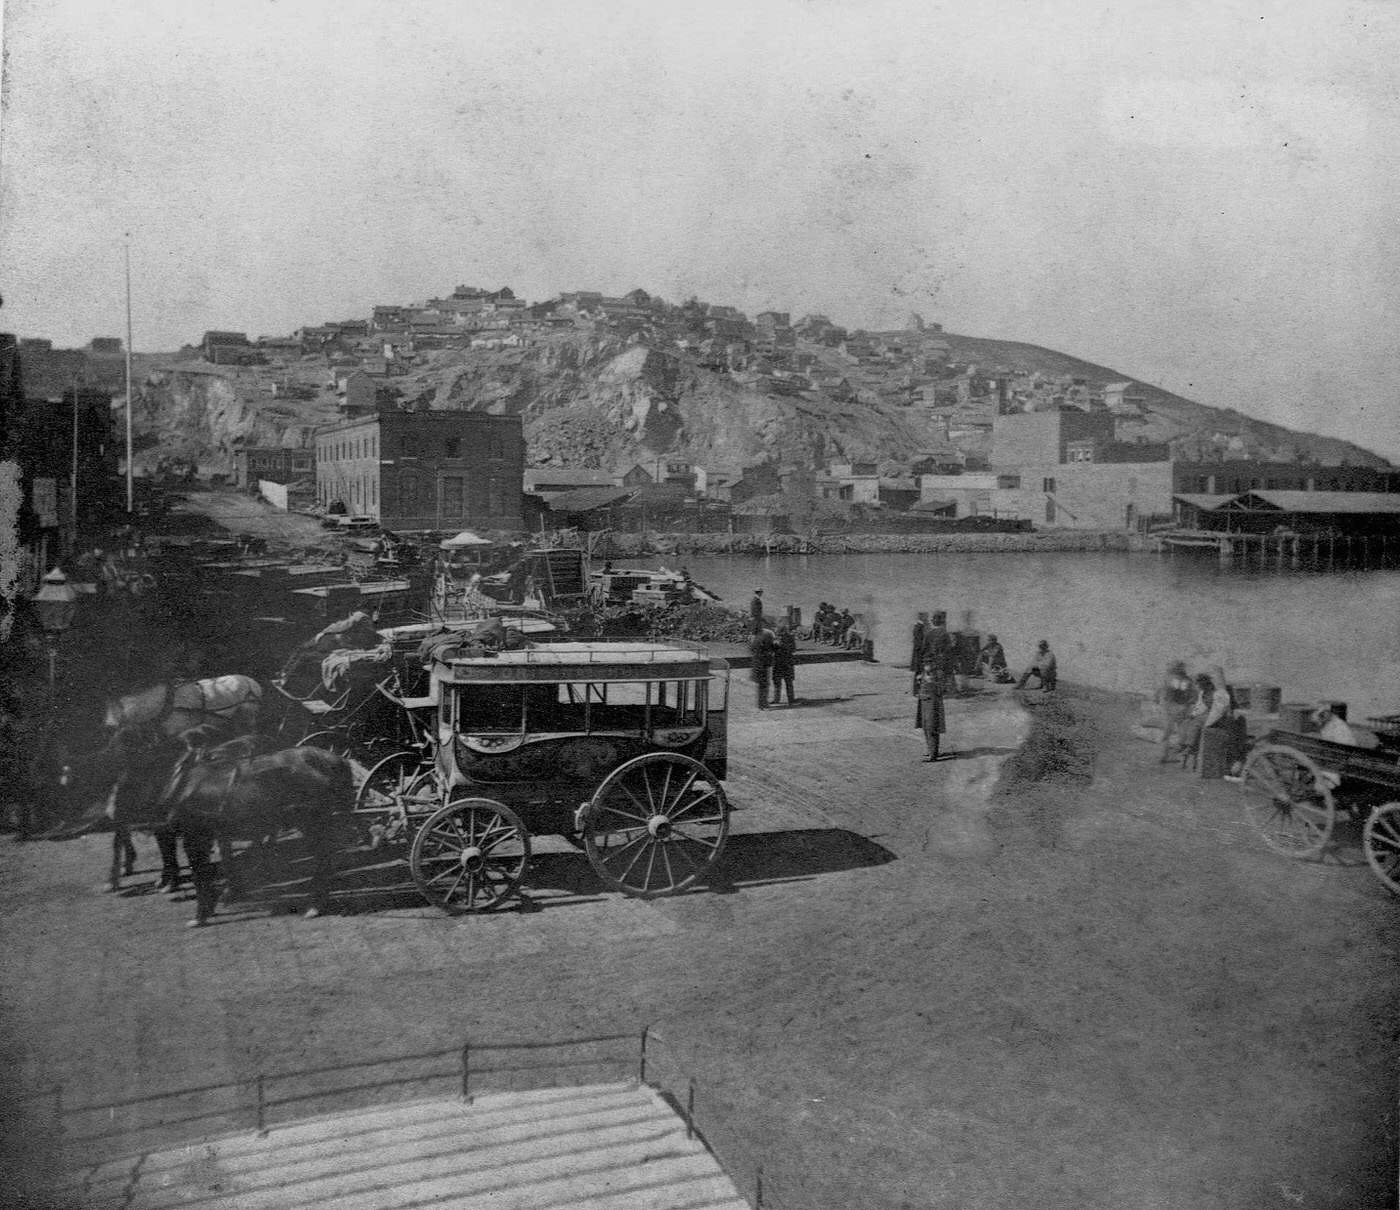 Few houses dot the face of Telegraph Hill above the wharf in San Francisco, 1850s